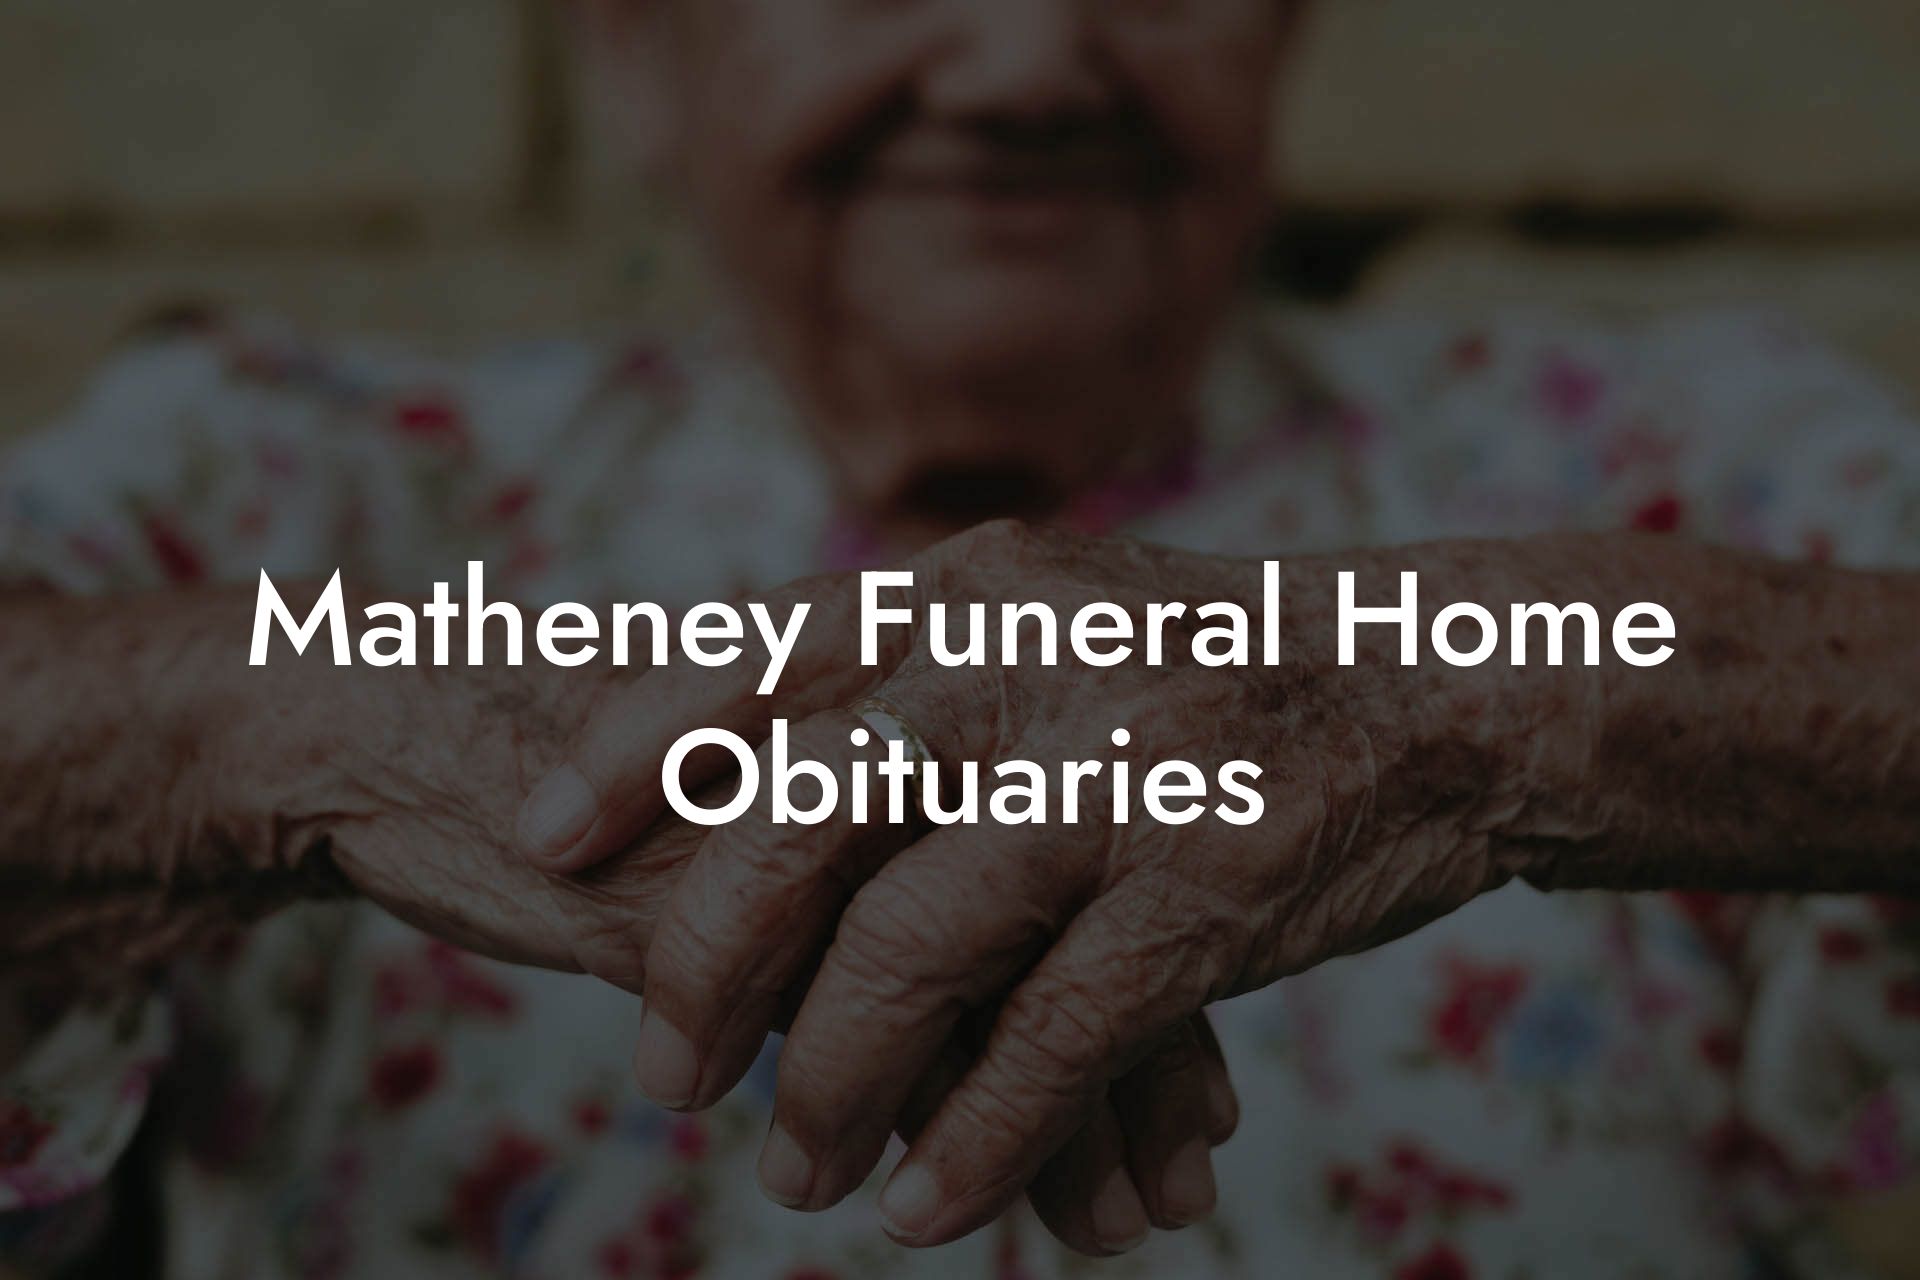 Matheney Funeral Home Obituaries